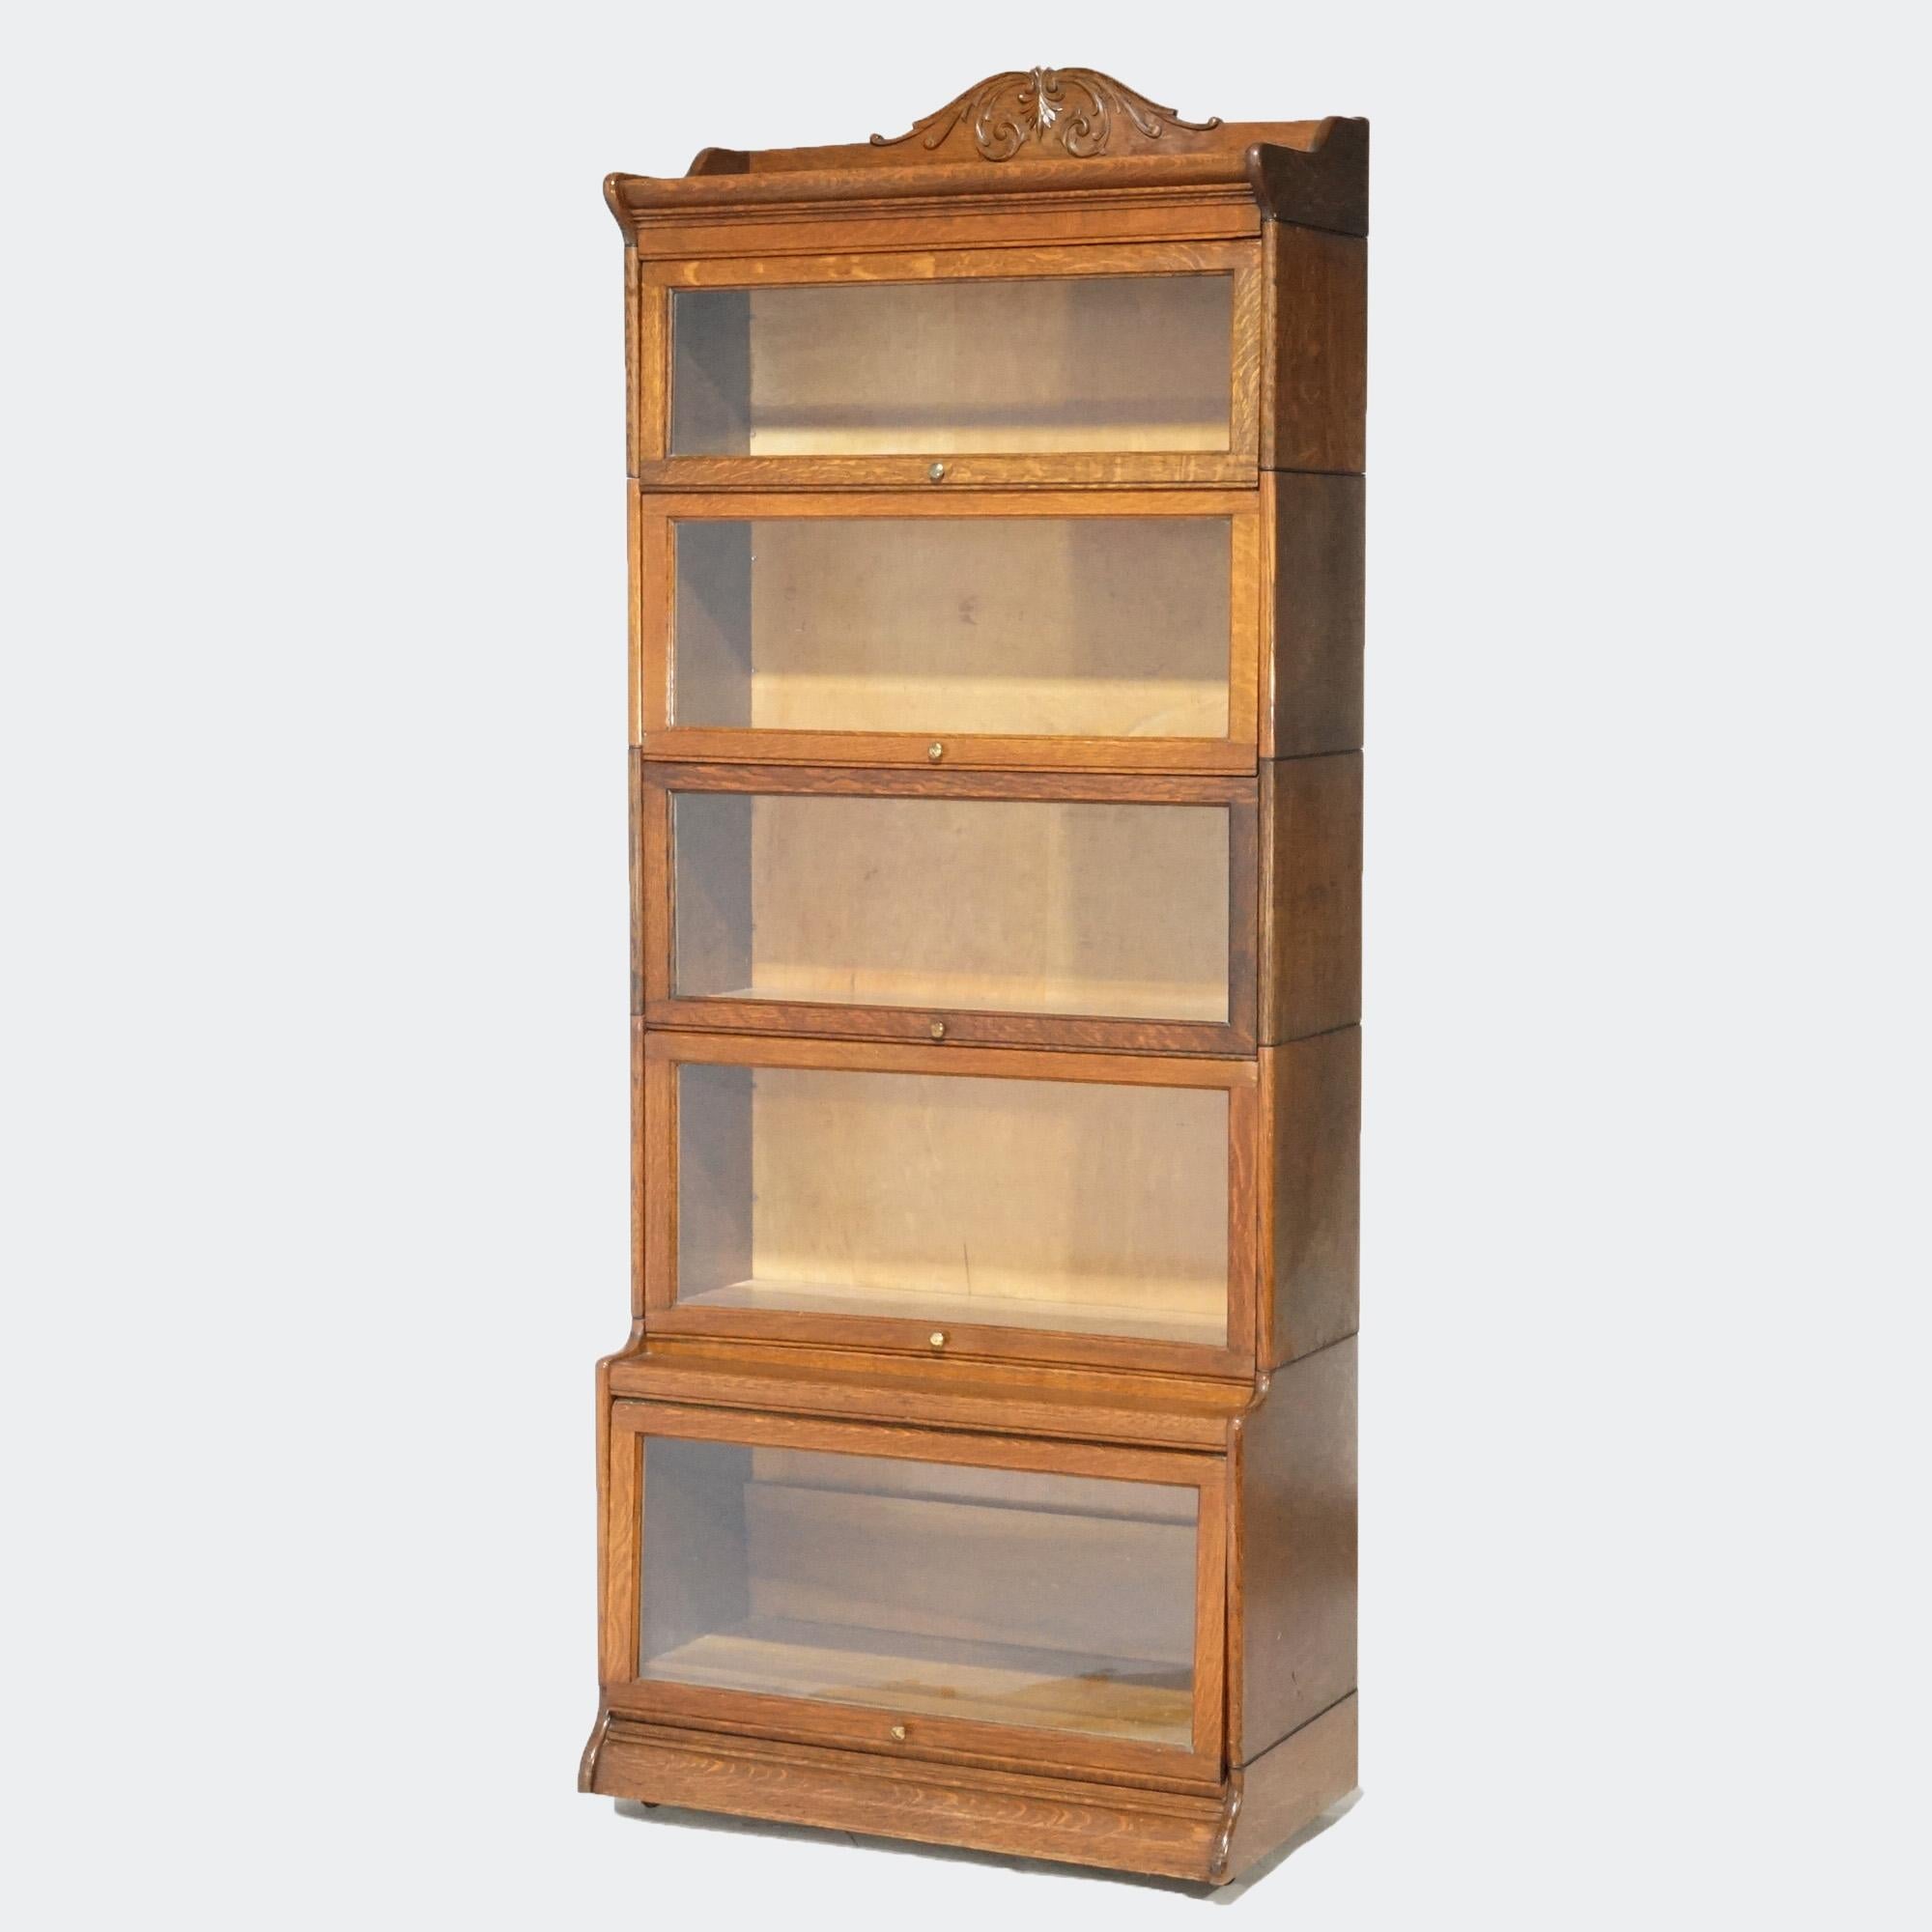 An antique Arts and Crafts barrister bookcase by Gunn offers oak construction with five stacks, each having pull-out glass doors, raised on an ogee base, maker label as photographed, circa 1910

Measures - 86